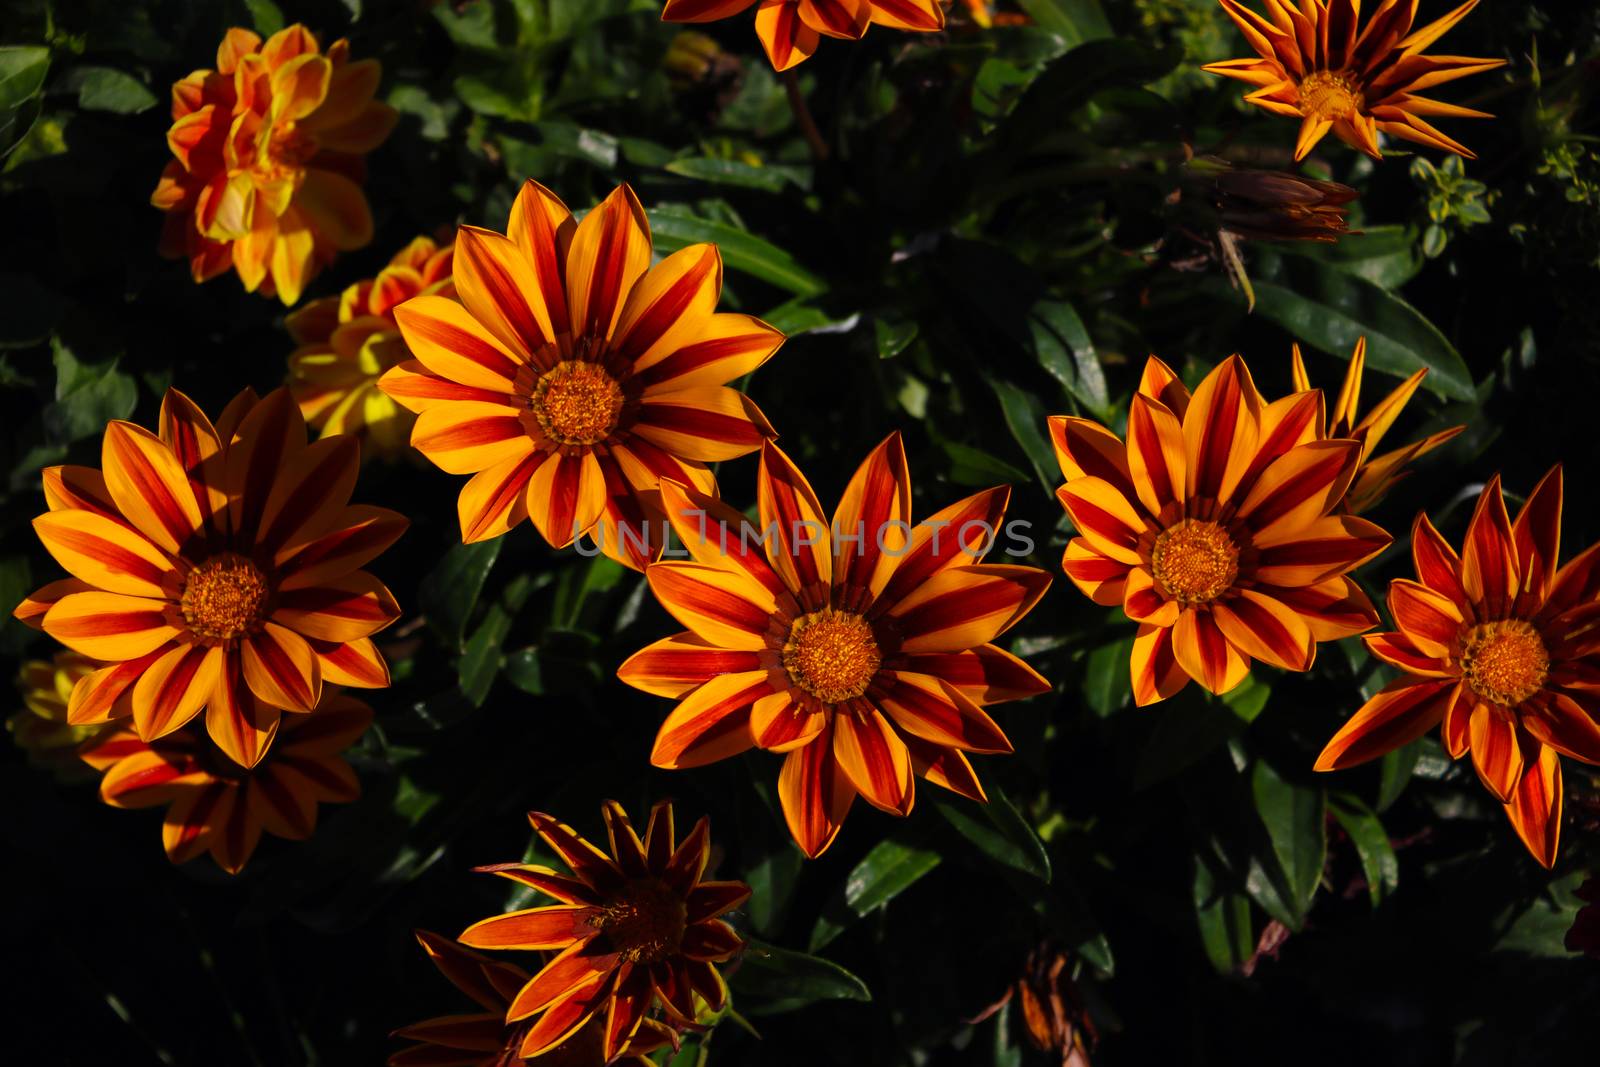 Colorful gazania flowers or african daisy in a garden. by kip02kas